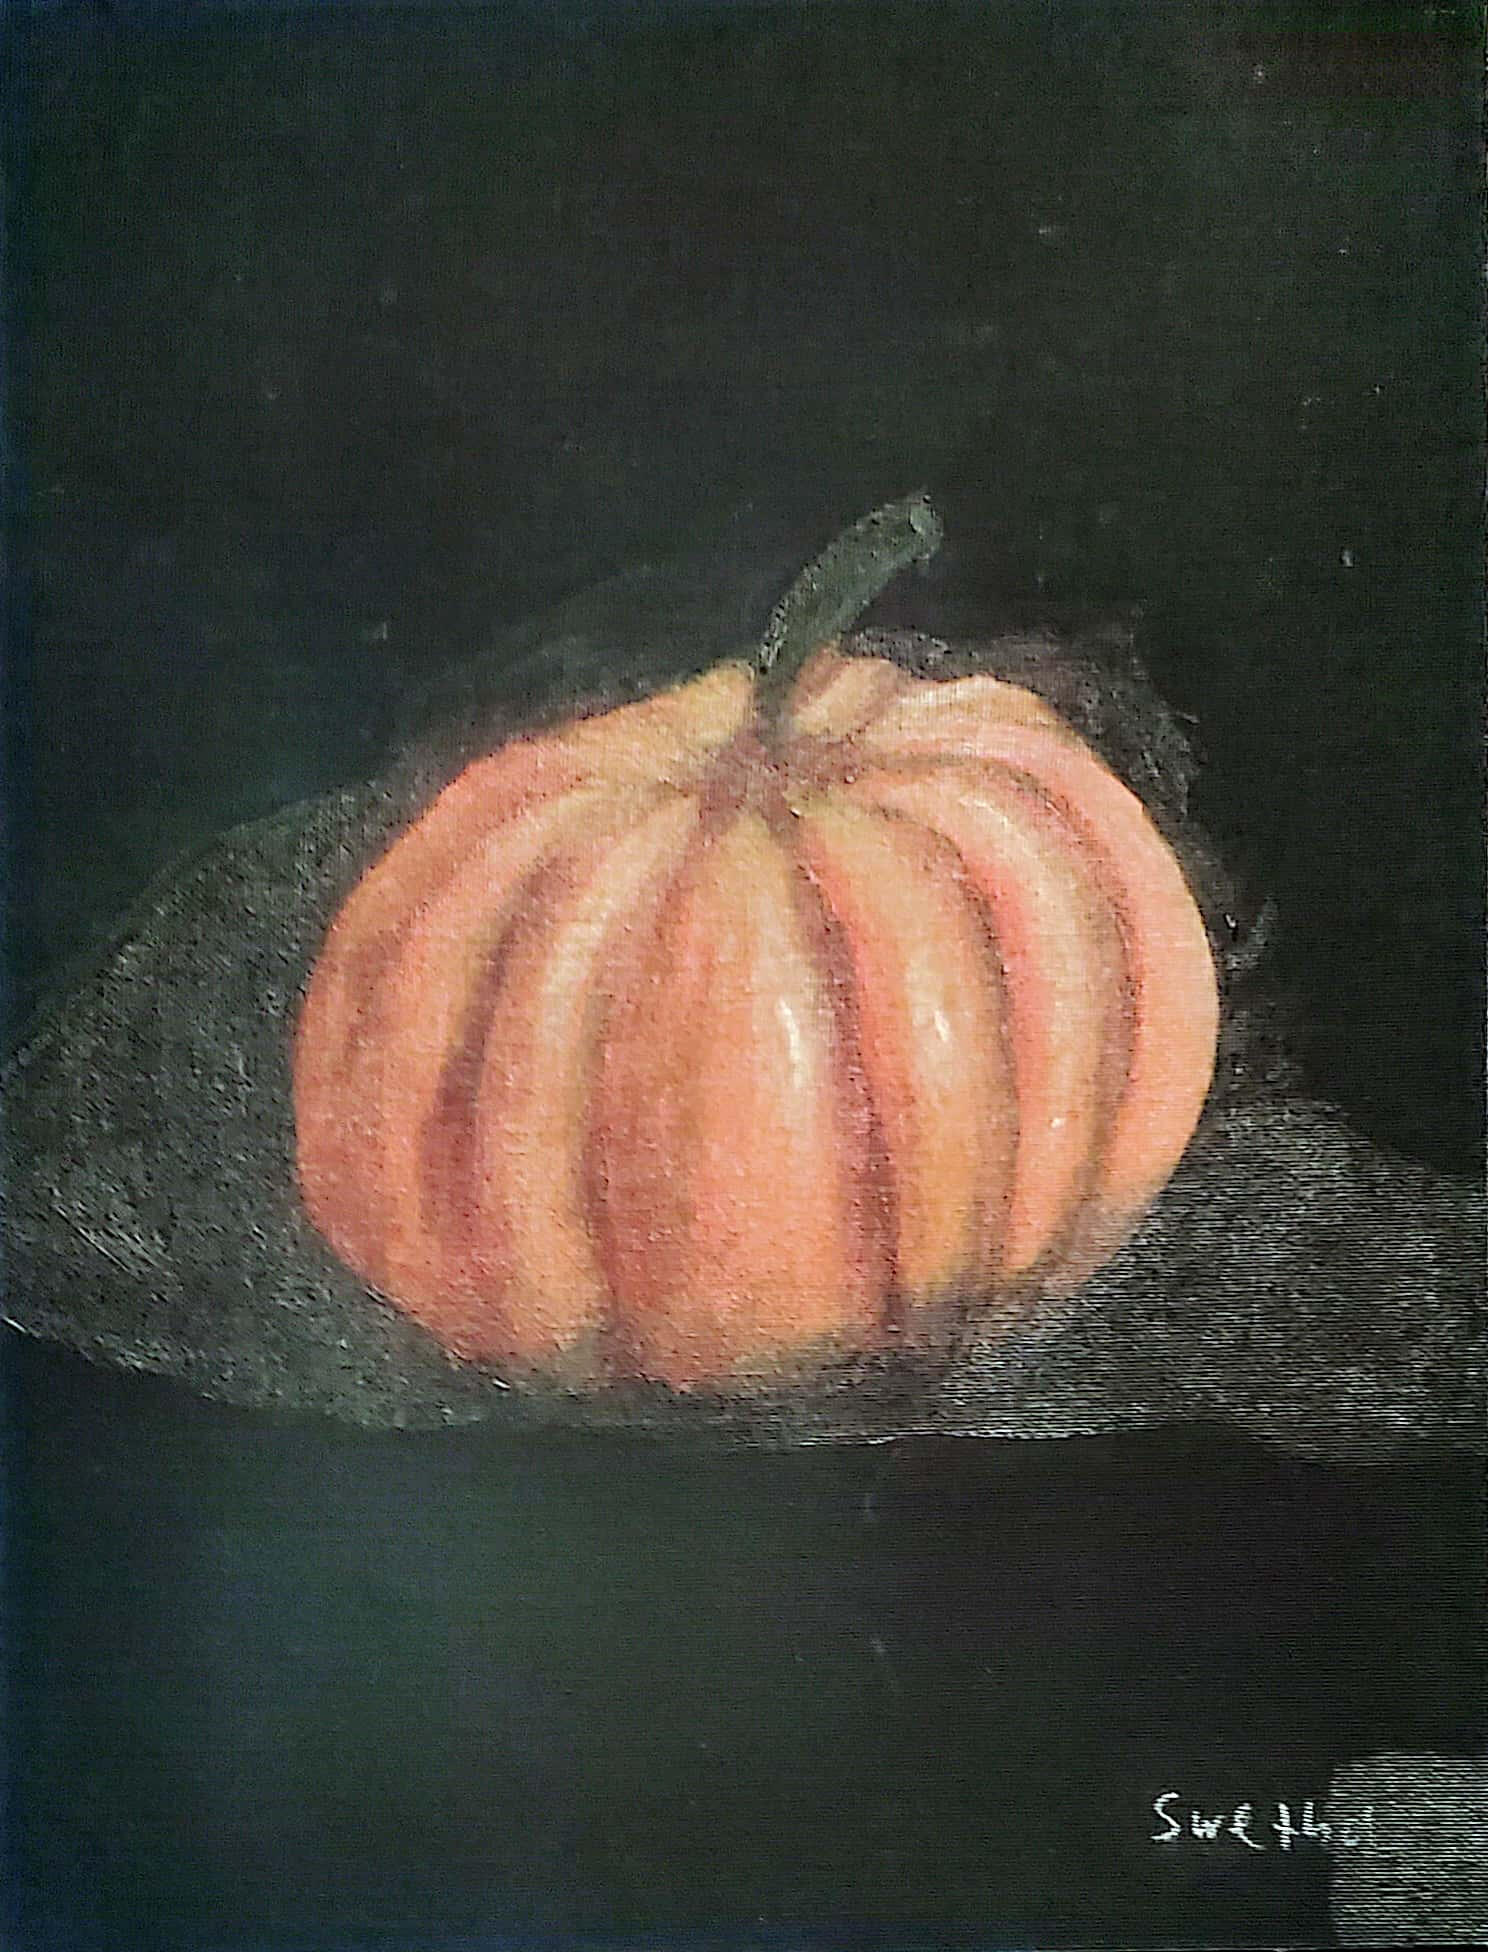 This is a pumpkin painting I did for class to practice shading and highlights and the mixture of colors.